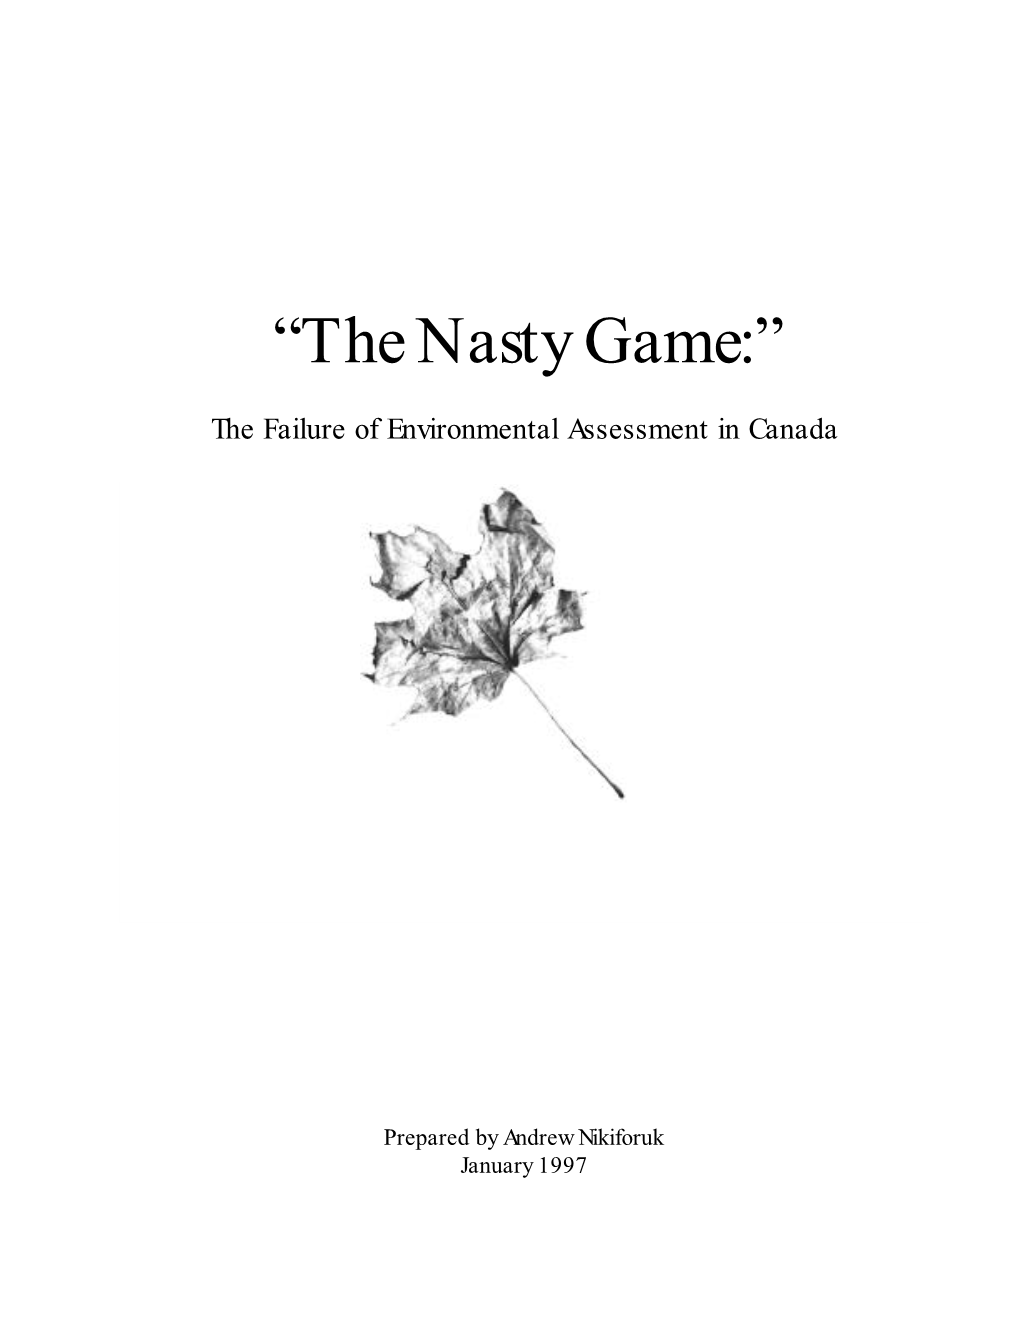 “The Nasty Game:” the Failure of Environmental Assessment in Canada Prepared, Andrew Nikiforuk, January 1997